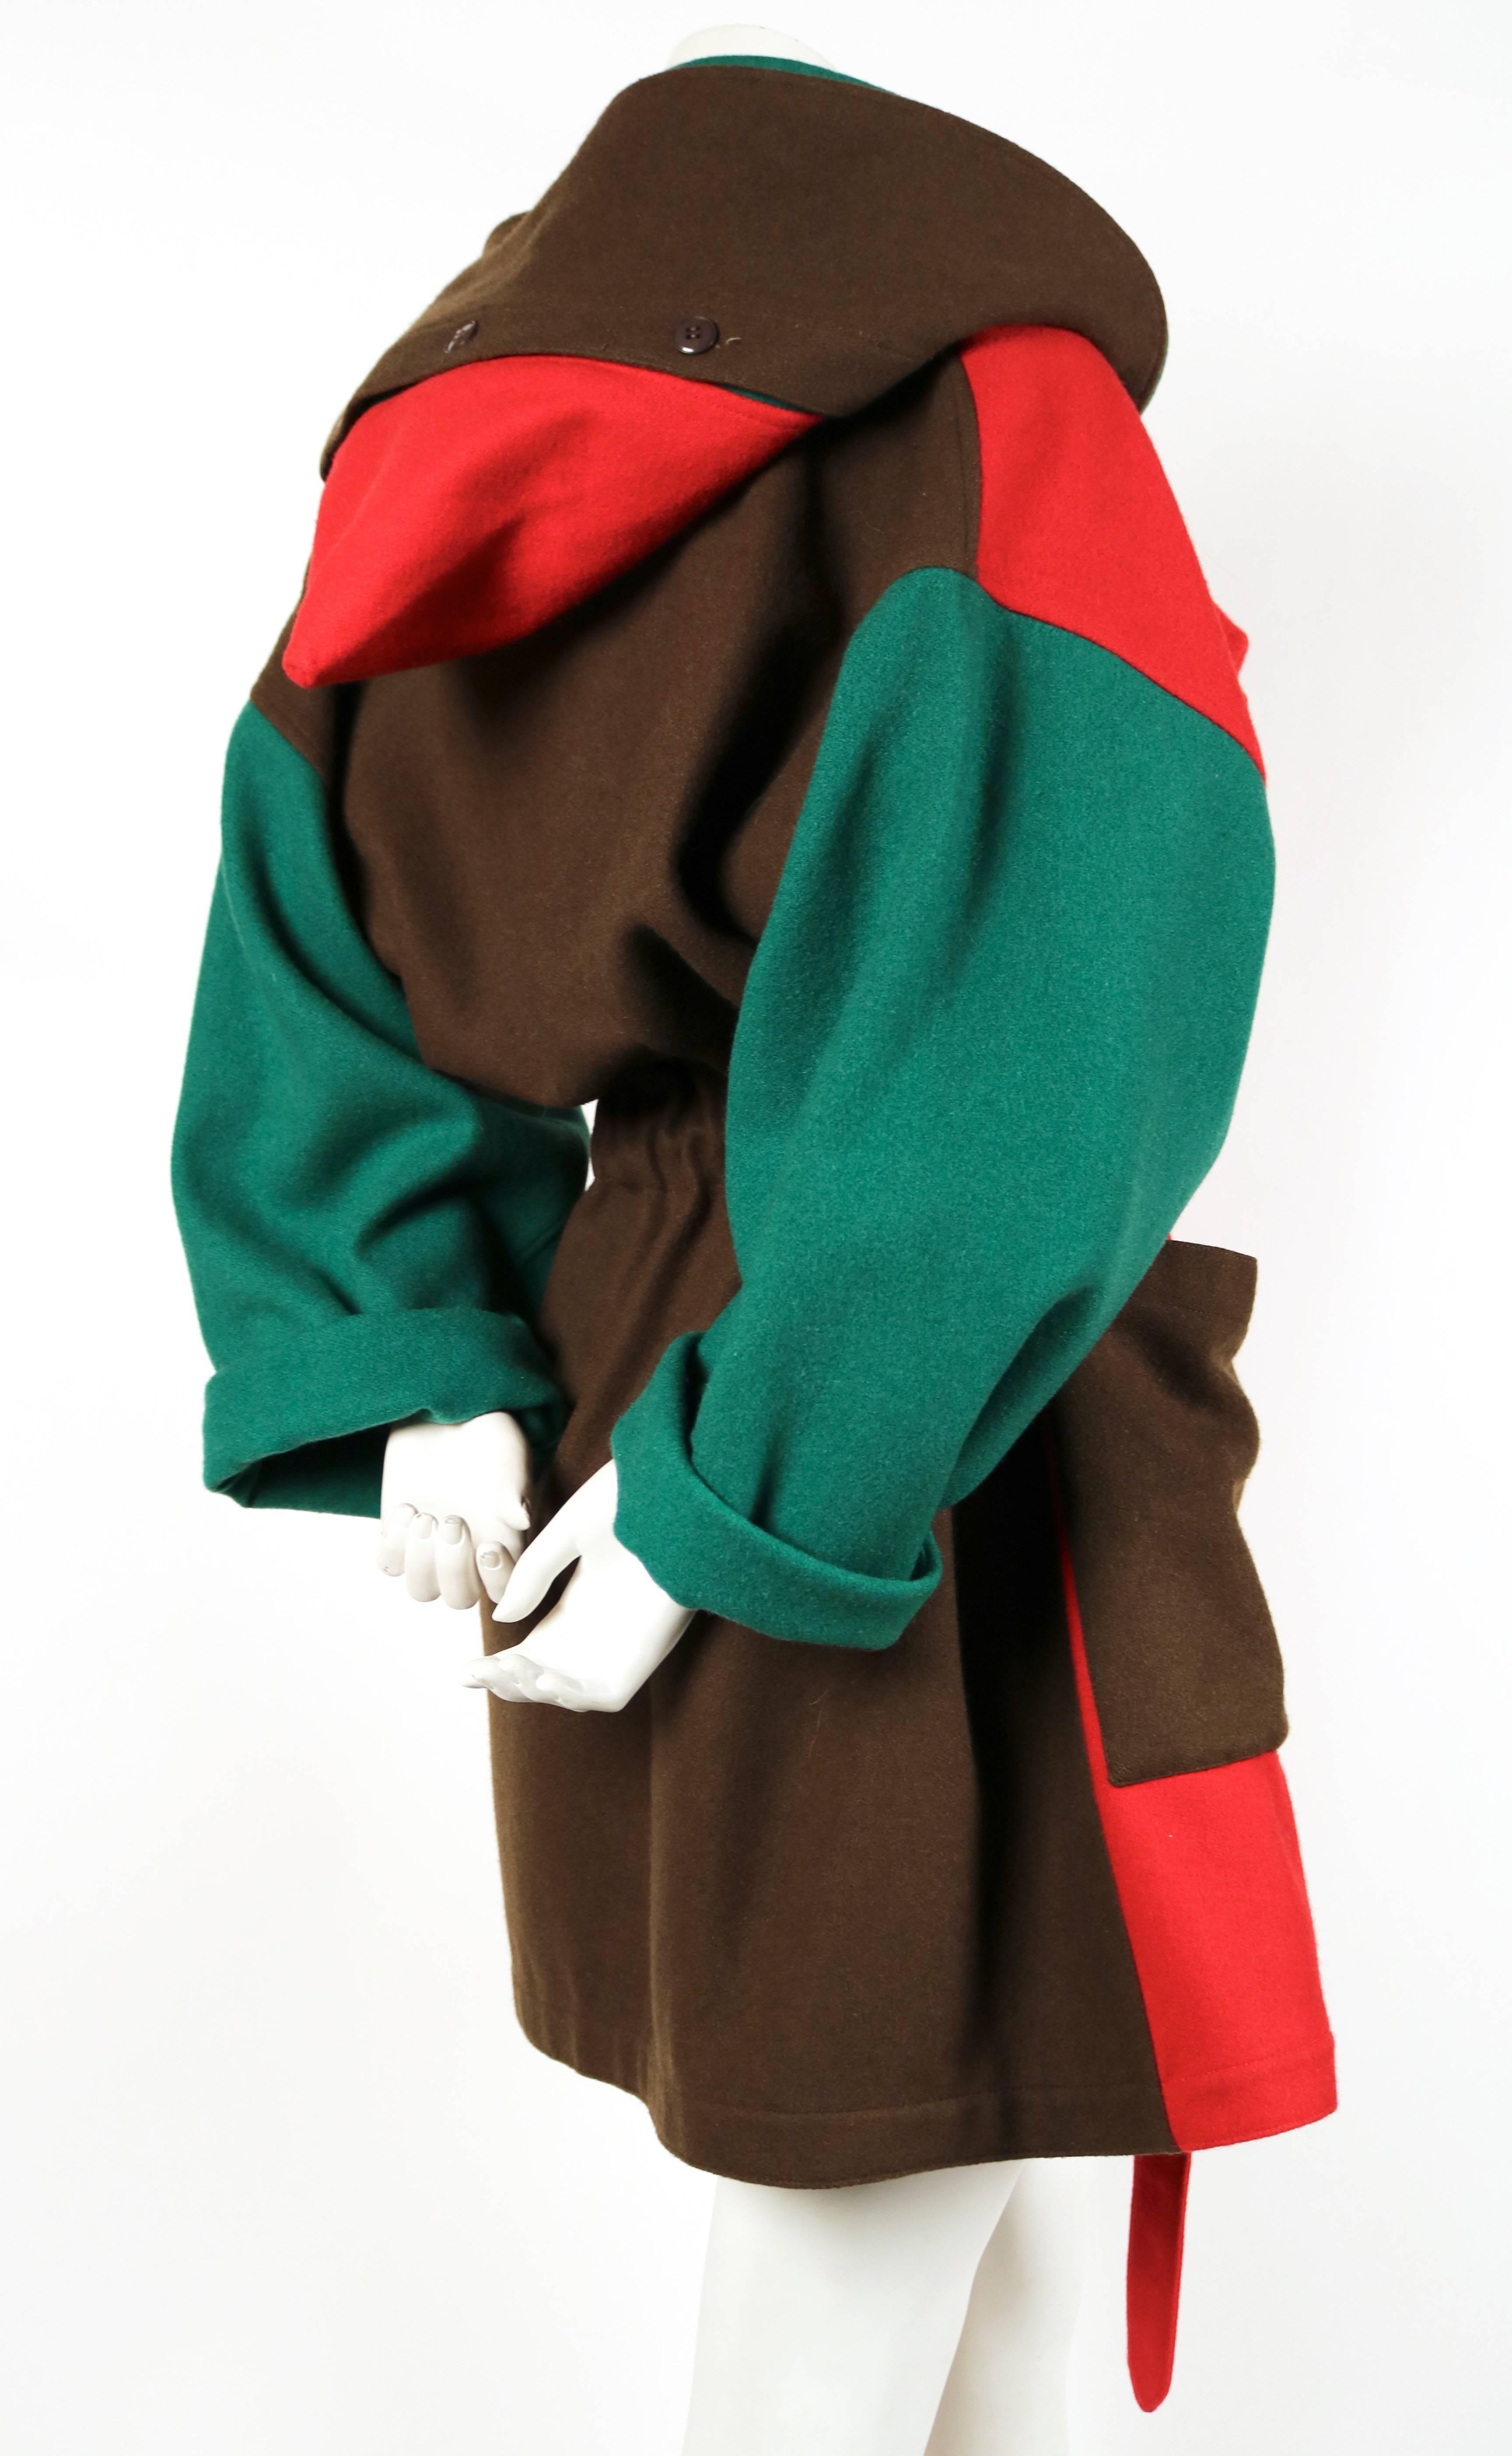 Vivid color-blocked wool felt coat with large hood from Jean Charles de Castelbajac dating to the late 1980's. Fits many sizes due to oversized cut. Length is 34